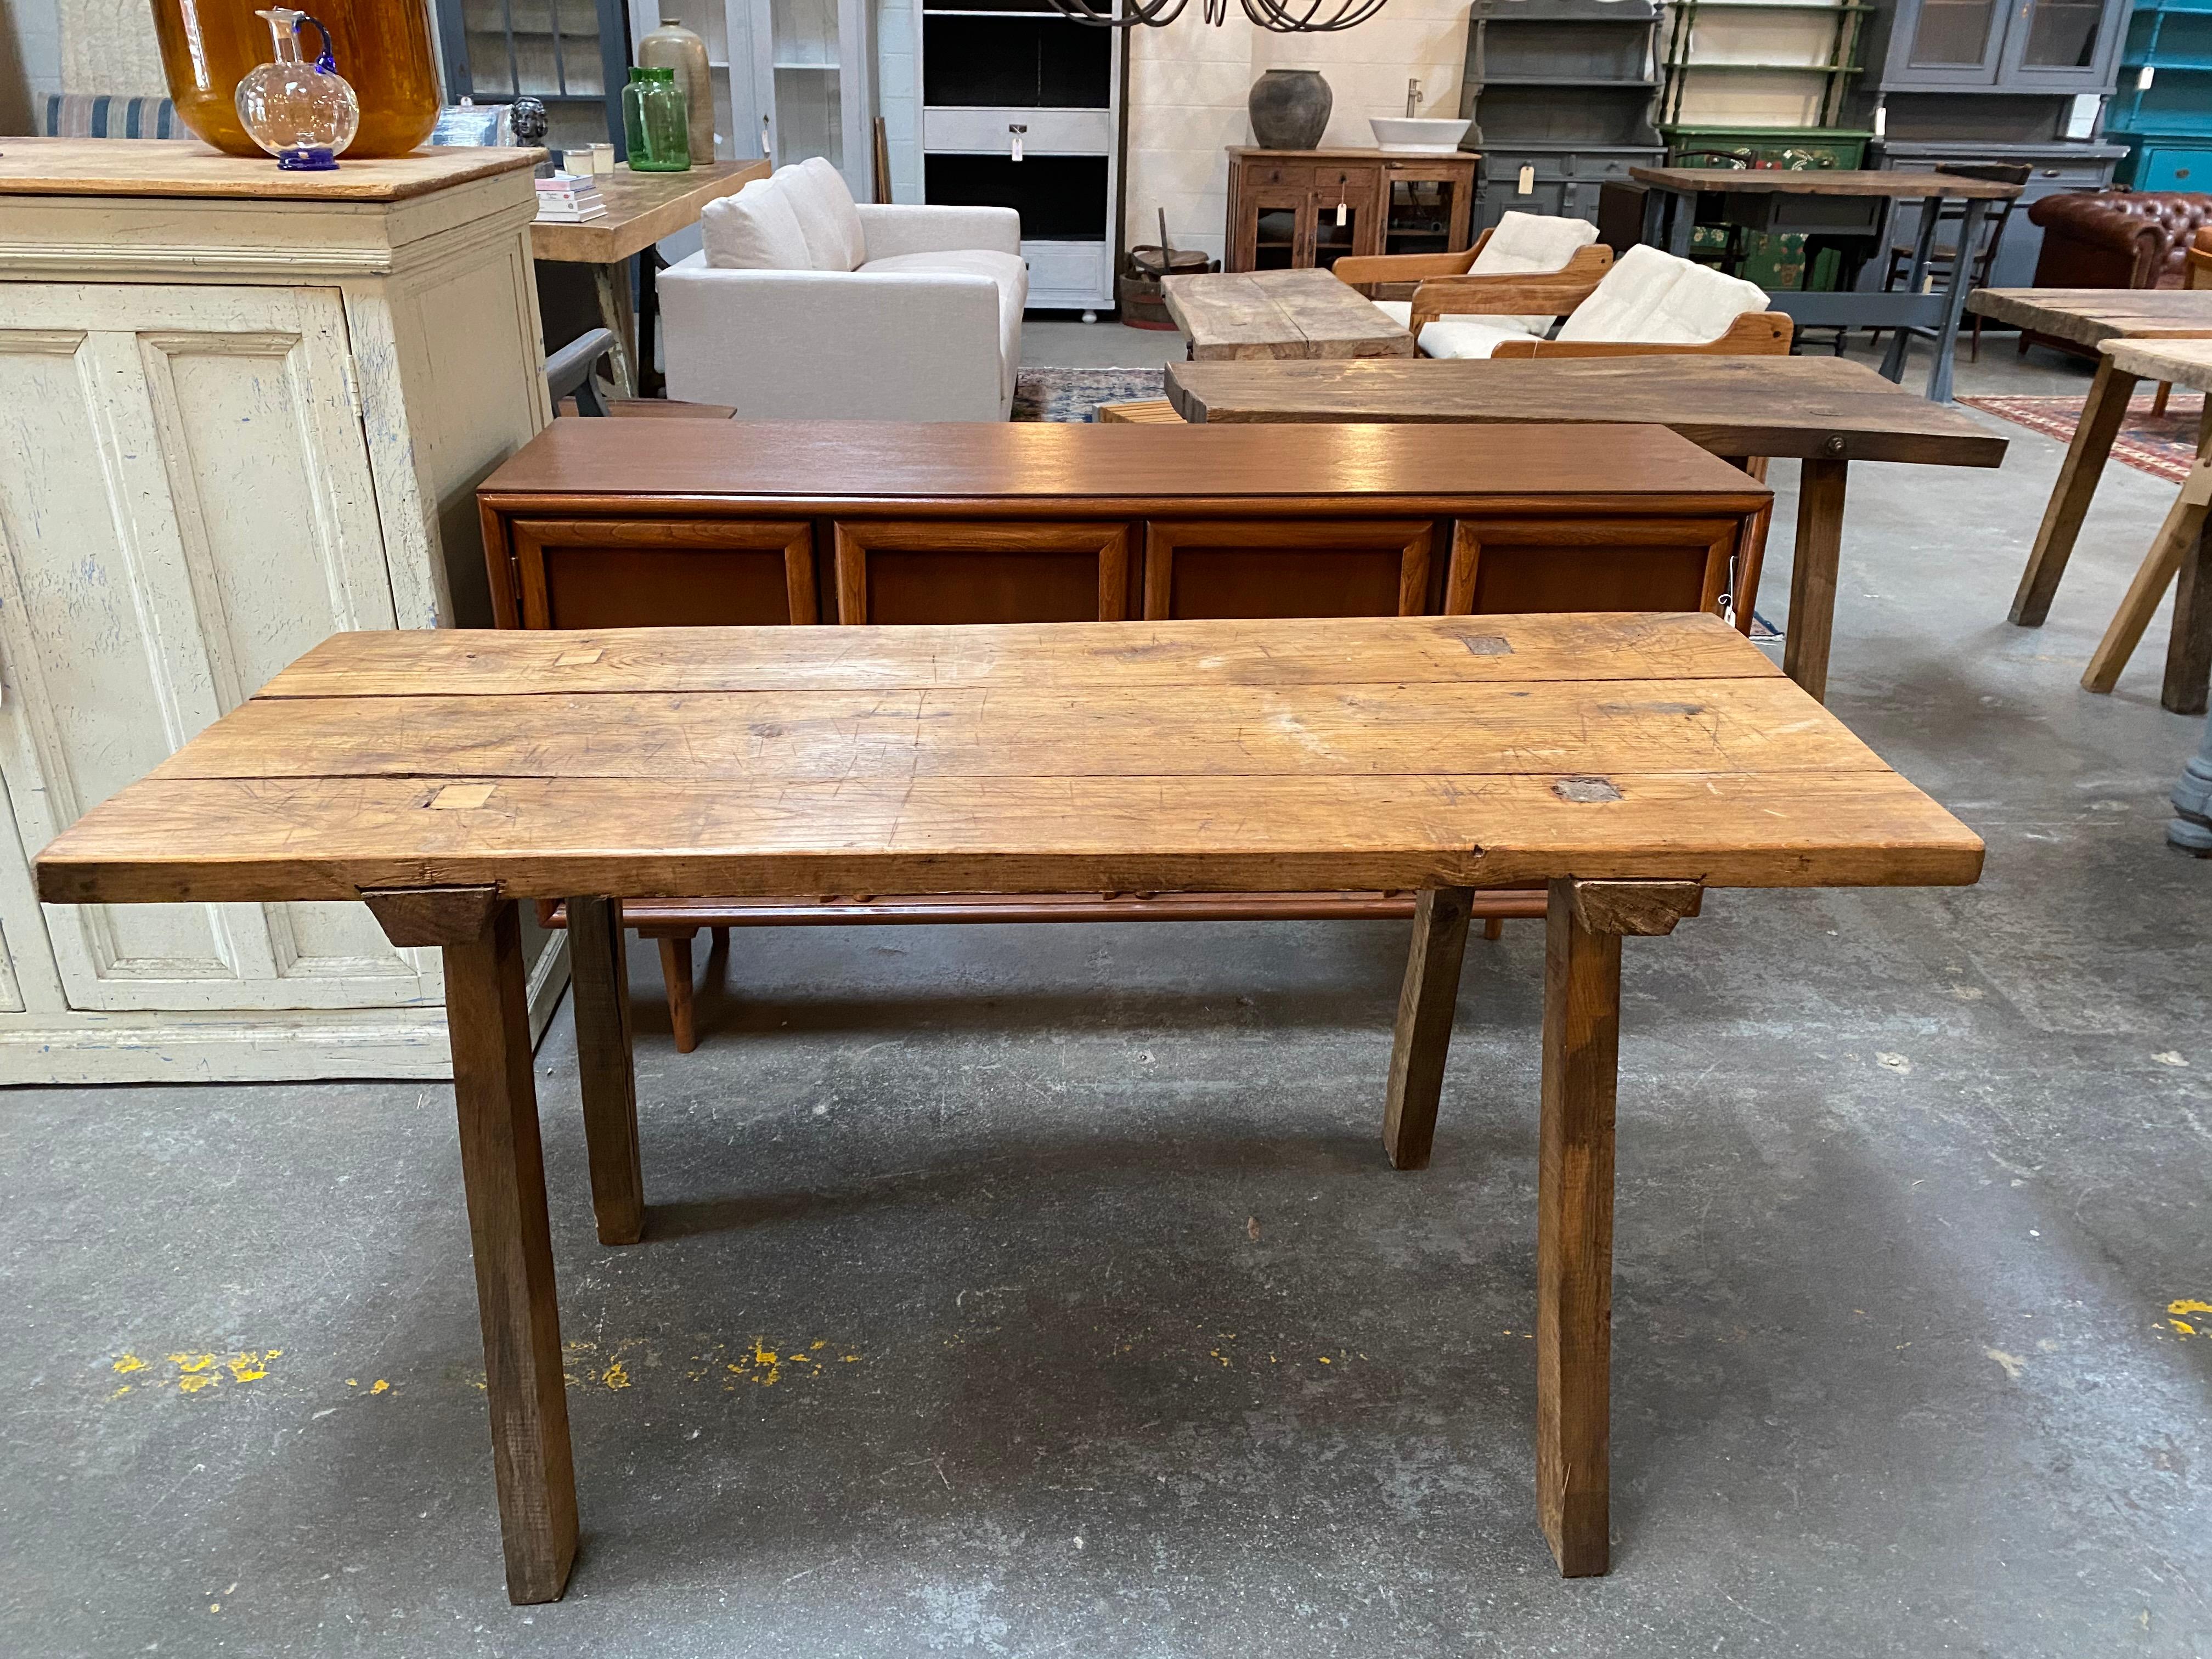 This French Butcher block table is in great sturdy condition and has a beautiful original finish. The table is very level and well made and would make a fantastic addition to a multitude of different rooms.